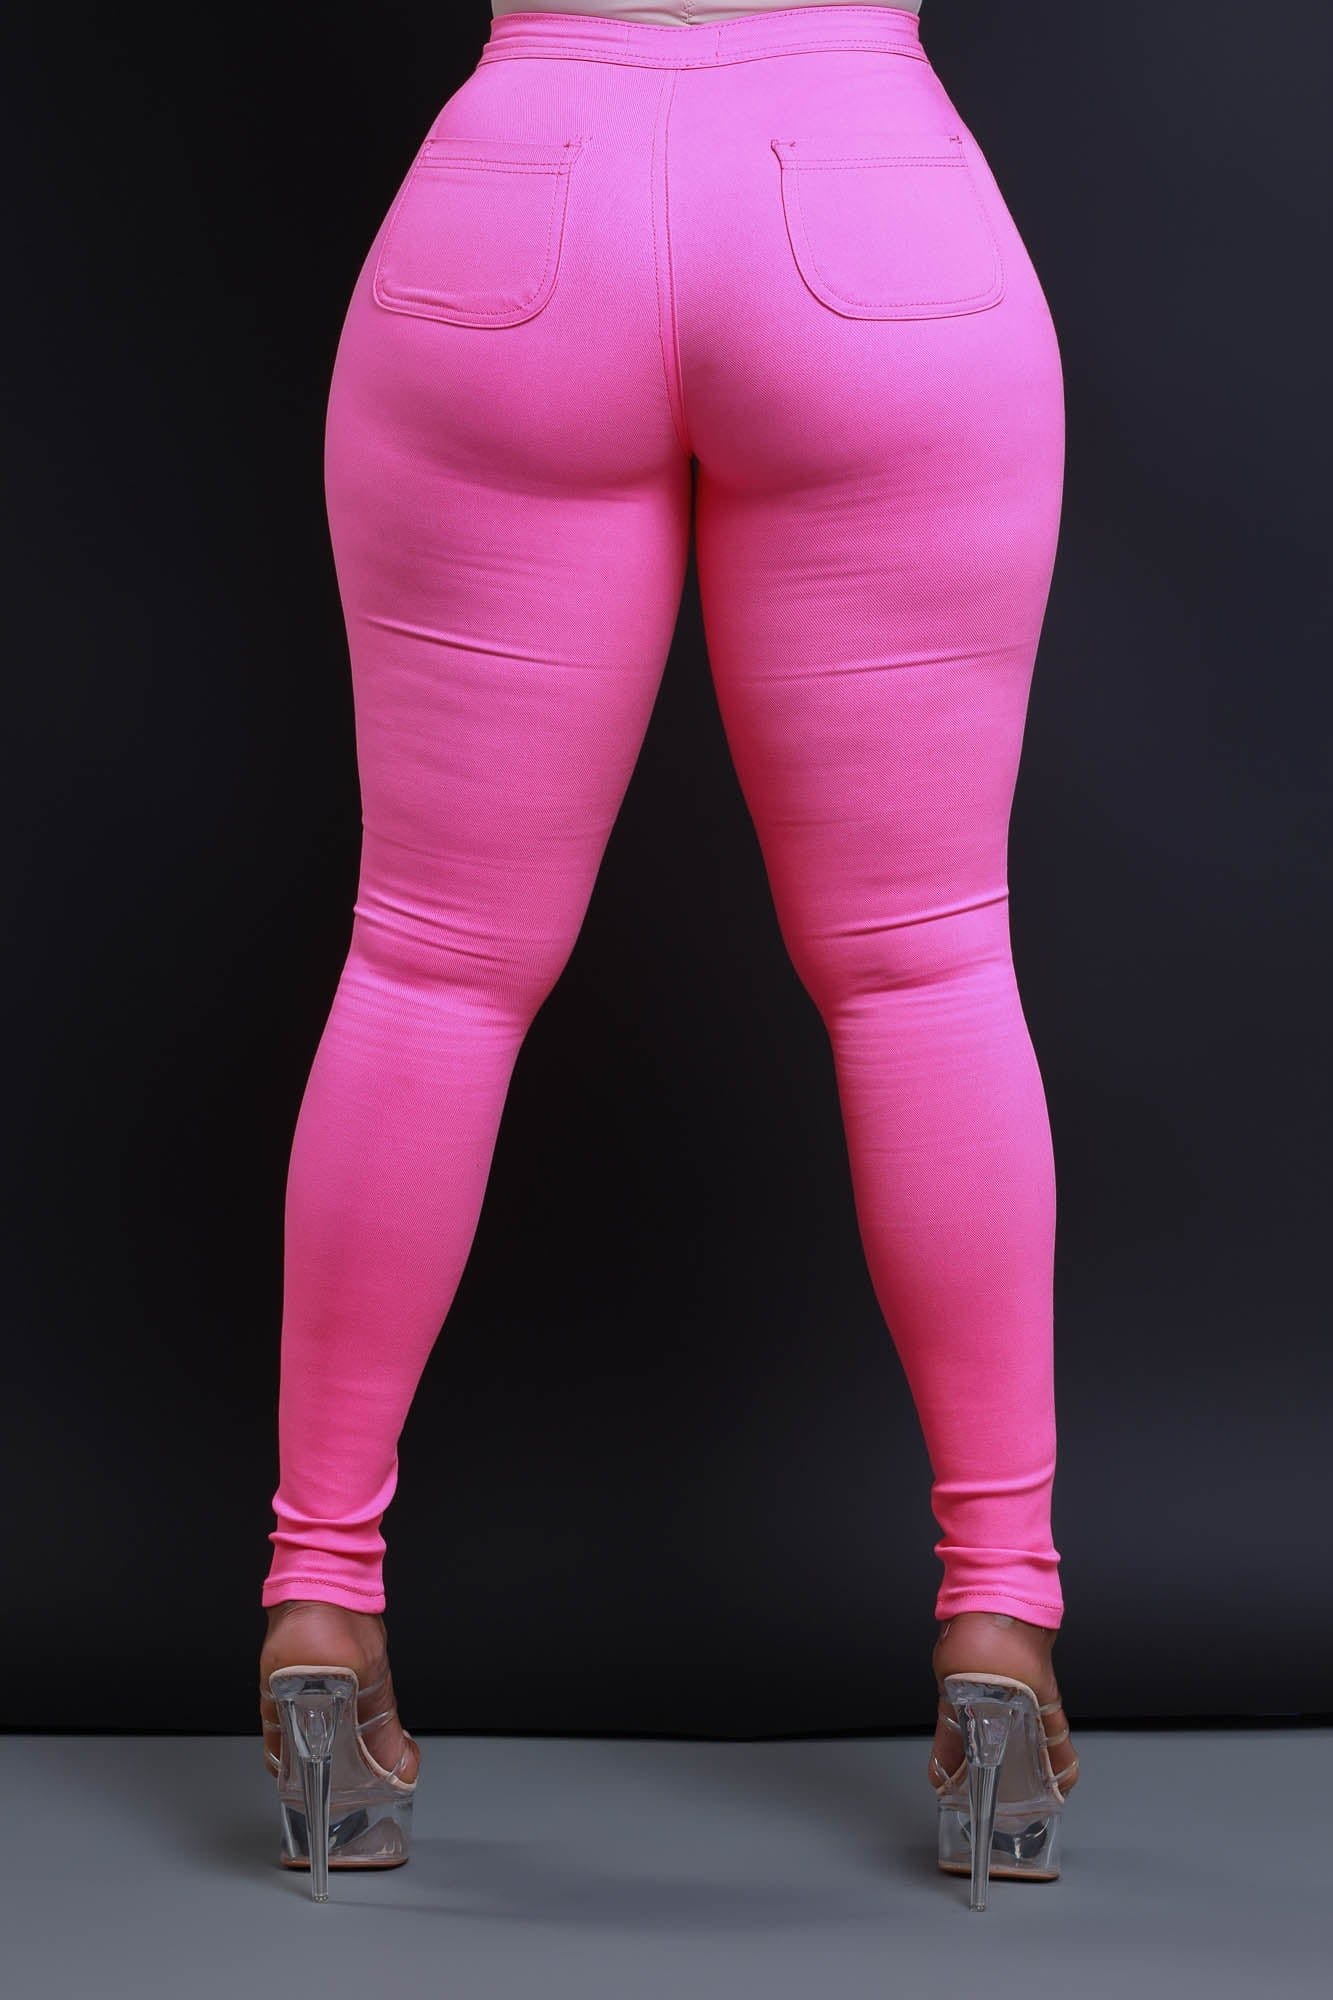 Image of Super Swank High Waist Stretchy Jeans - Neon Pink